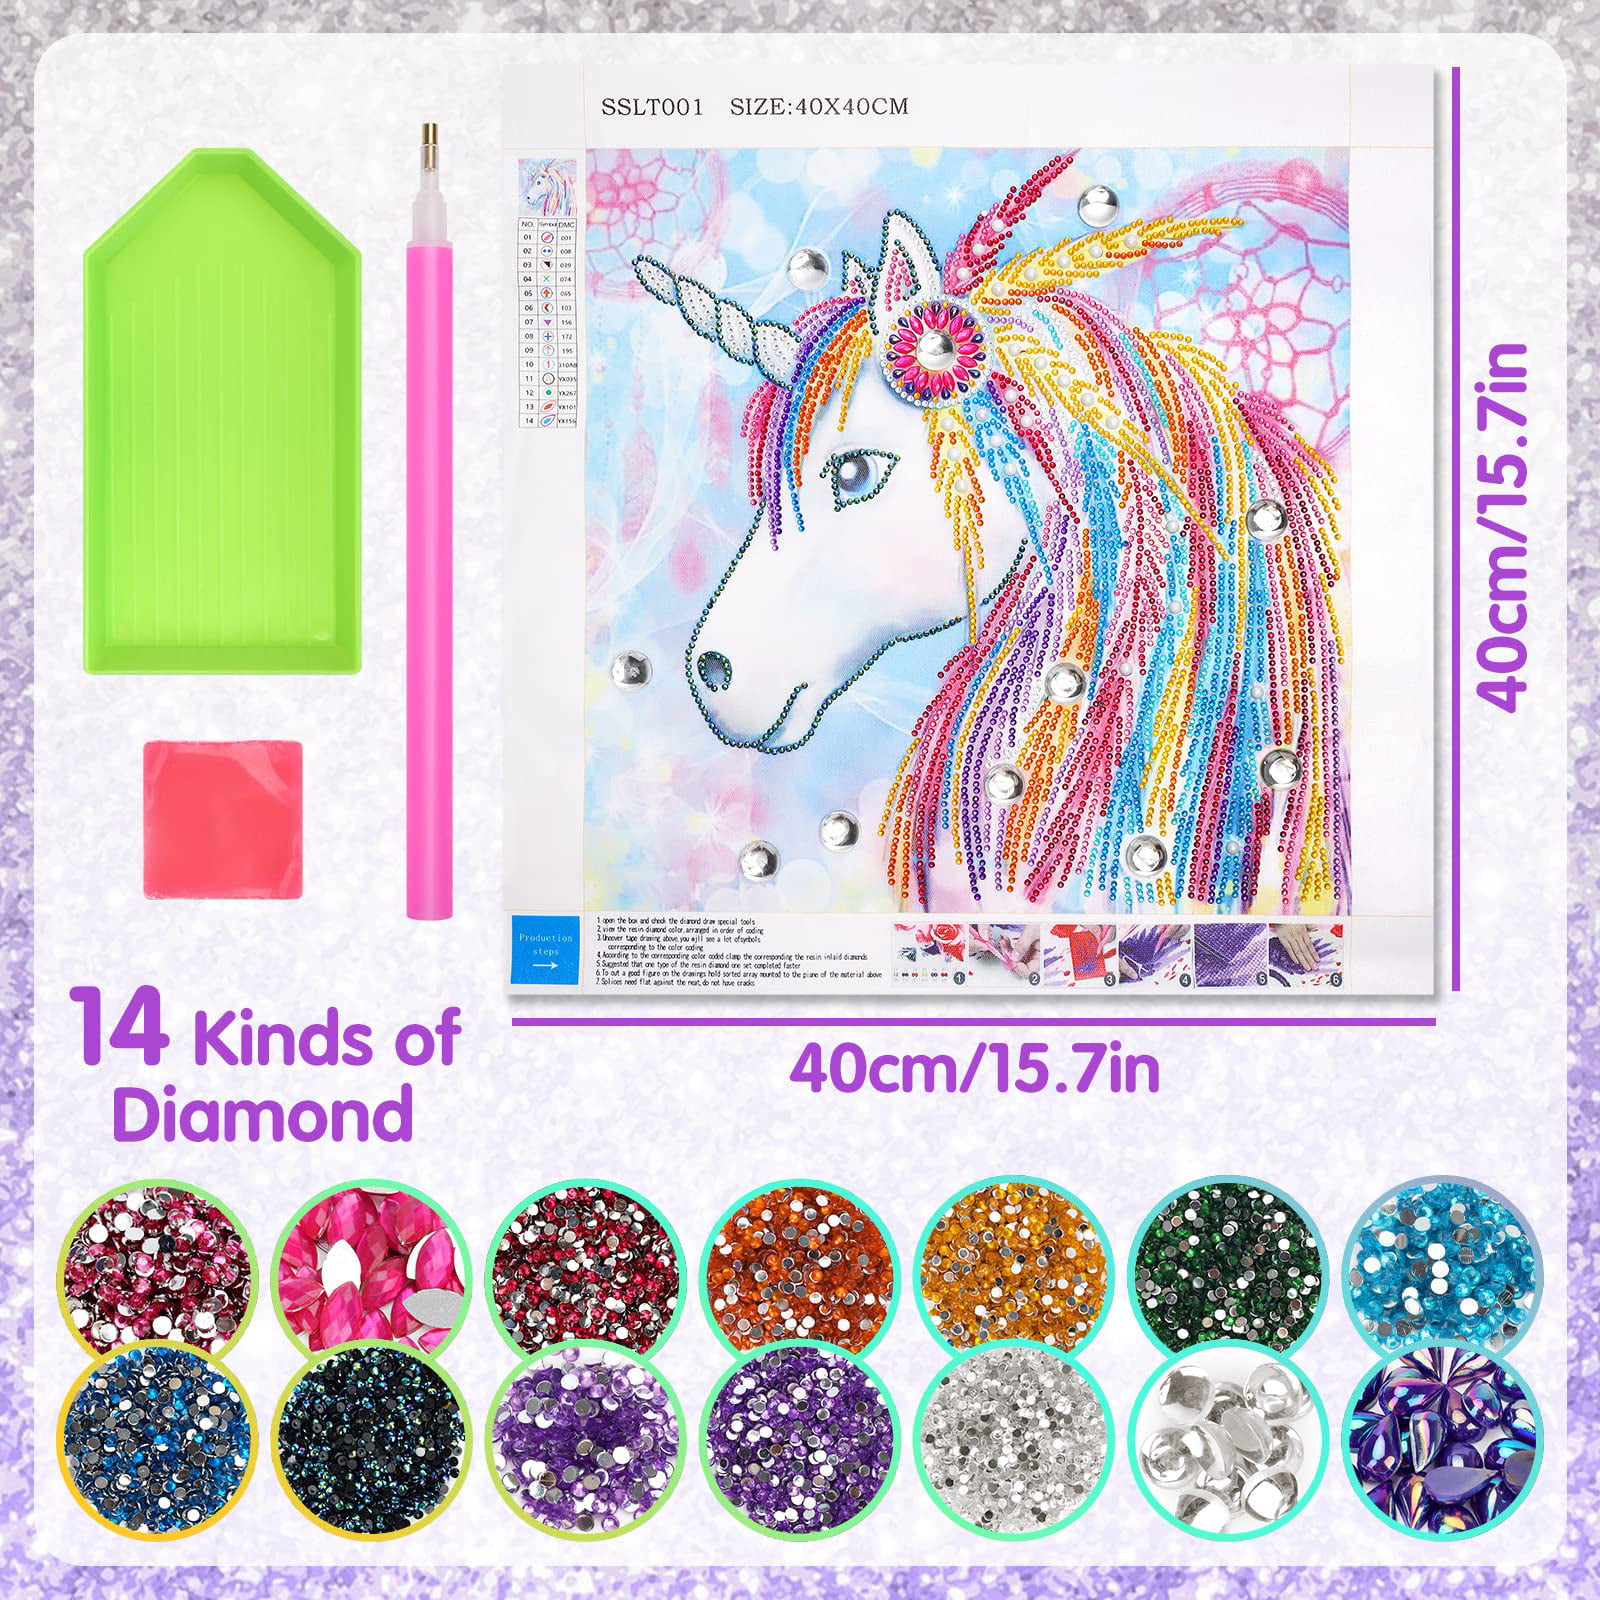 Dream Fun Diamond Art Toys Gifts for 6 7 8 9 10 Years Old Girls boys Adults,  Diamond Arts and Crafts for Kids Age 9 10 11 12, Accessories for Teenage  Women Friends Girl Toy Birthday Presents 